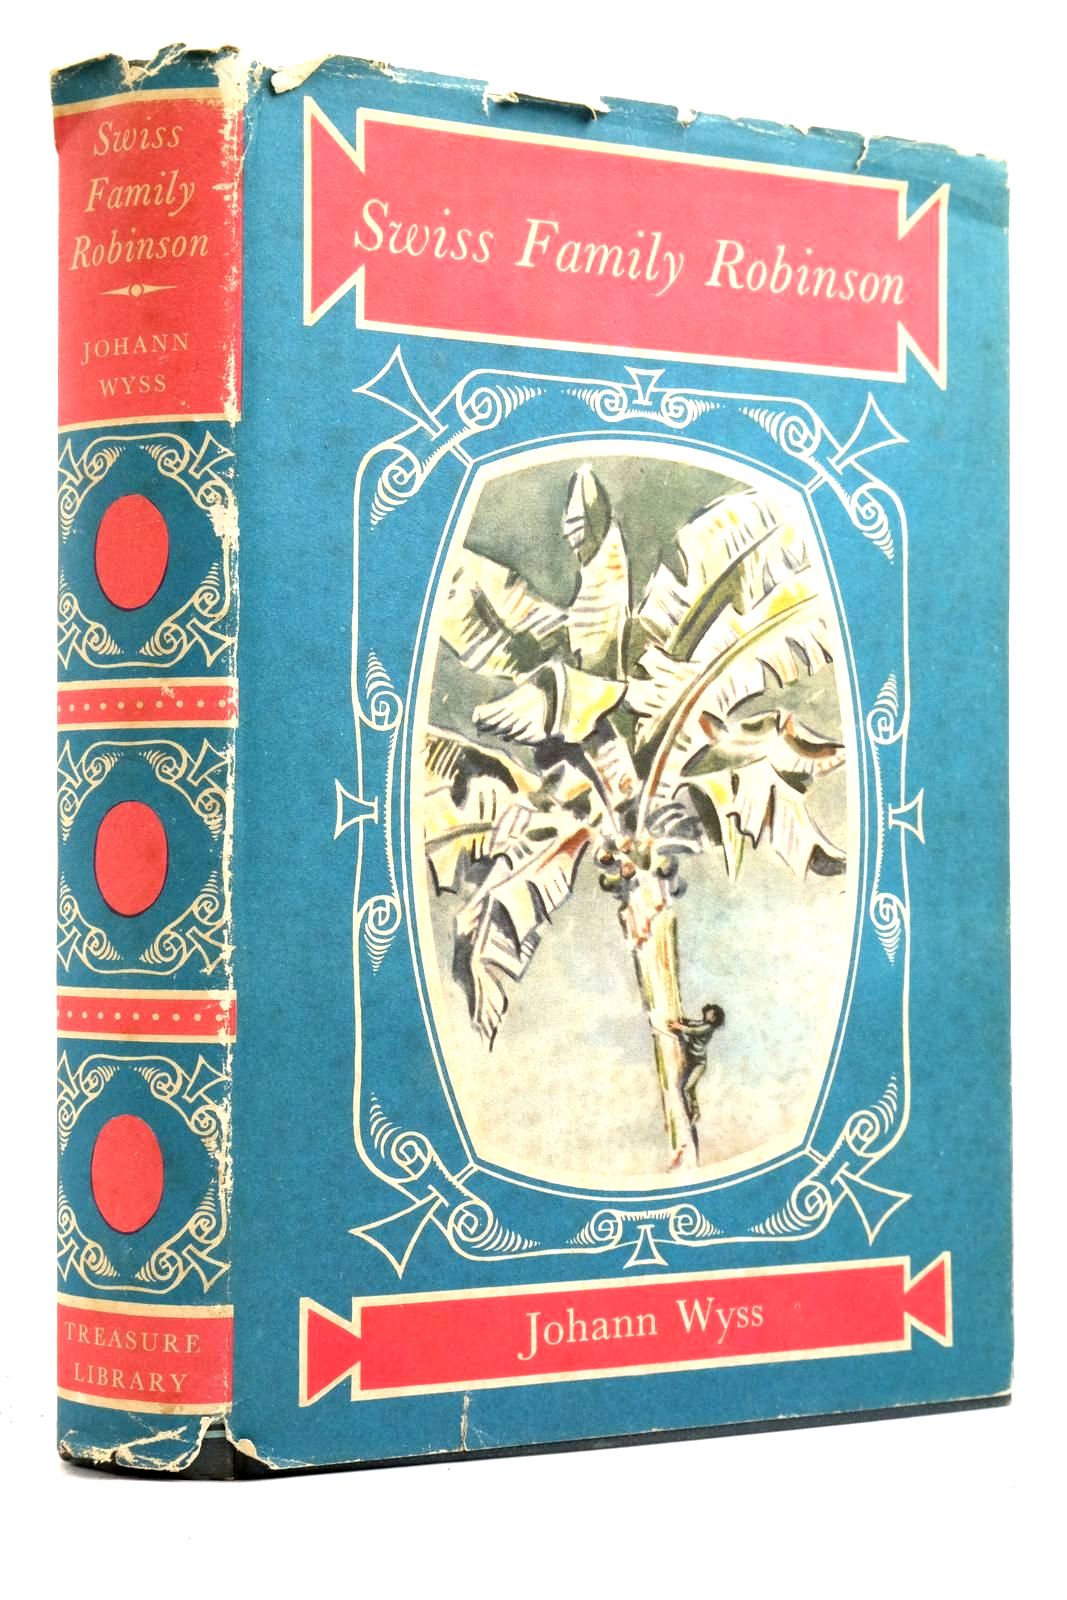 Photo of THE SWISS FAMILY ROBINSON written by Wyss, Johann illustrated by Peake, Mervyn published by Treasure Library (STOCK CODE: 2135492)  for sale by Stella & Rose's Books